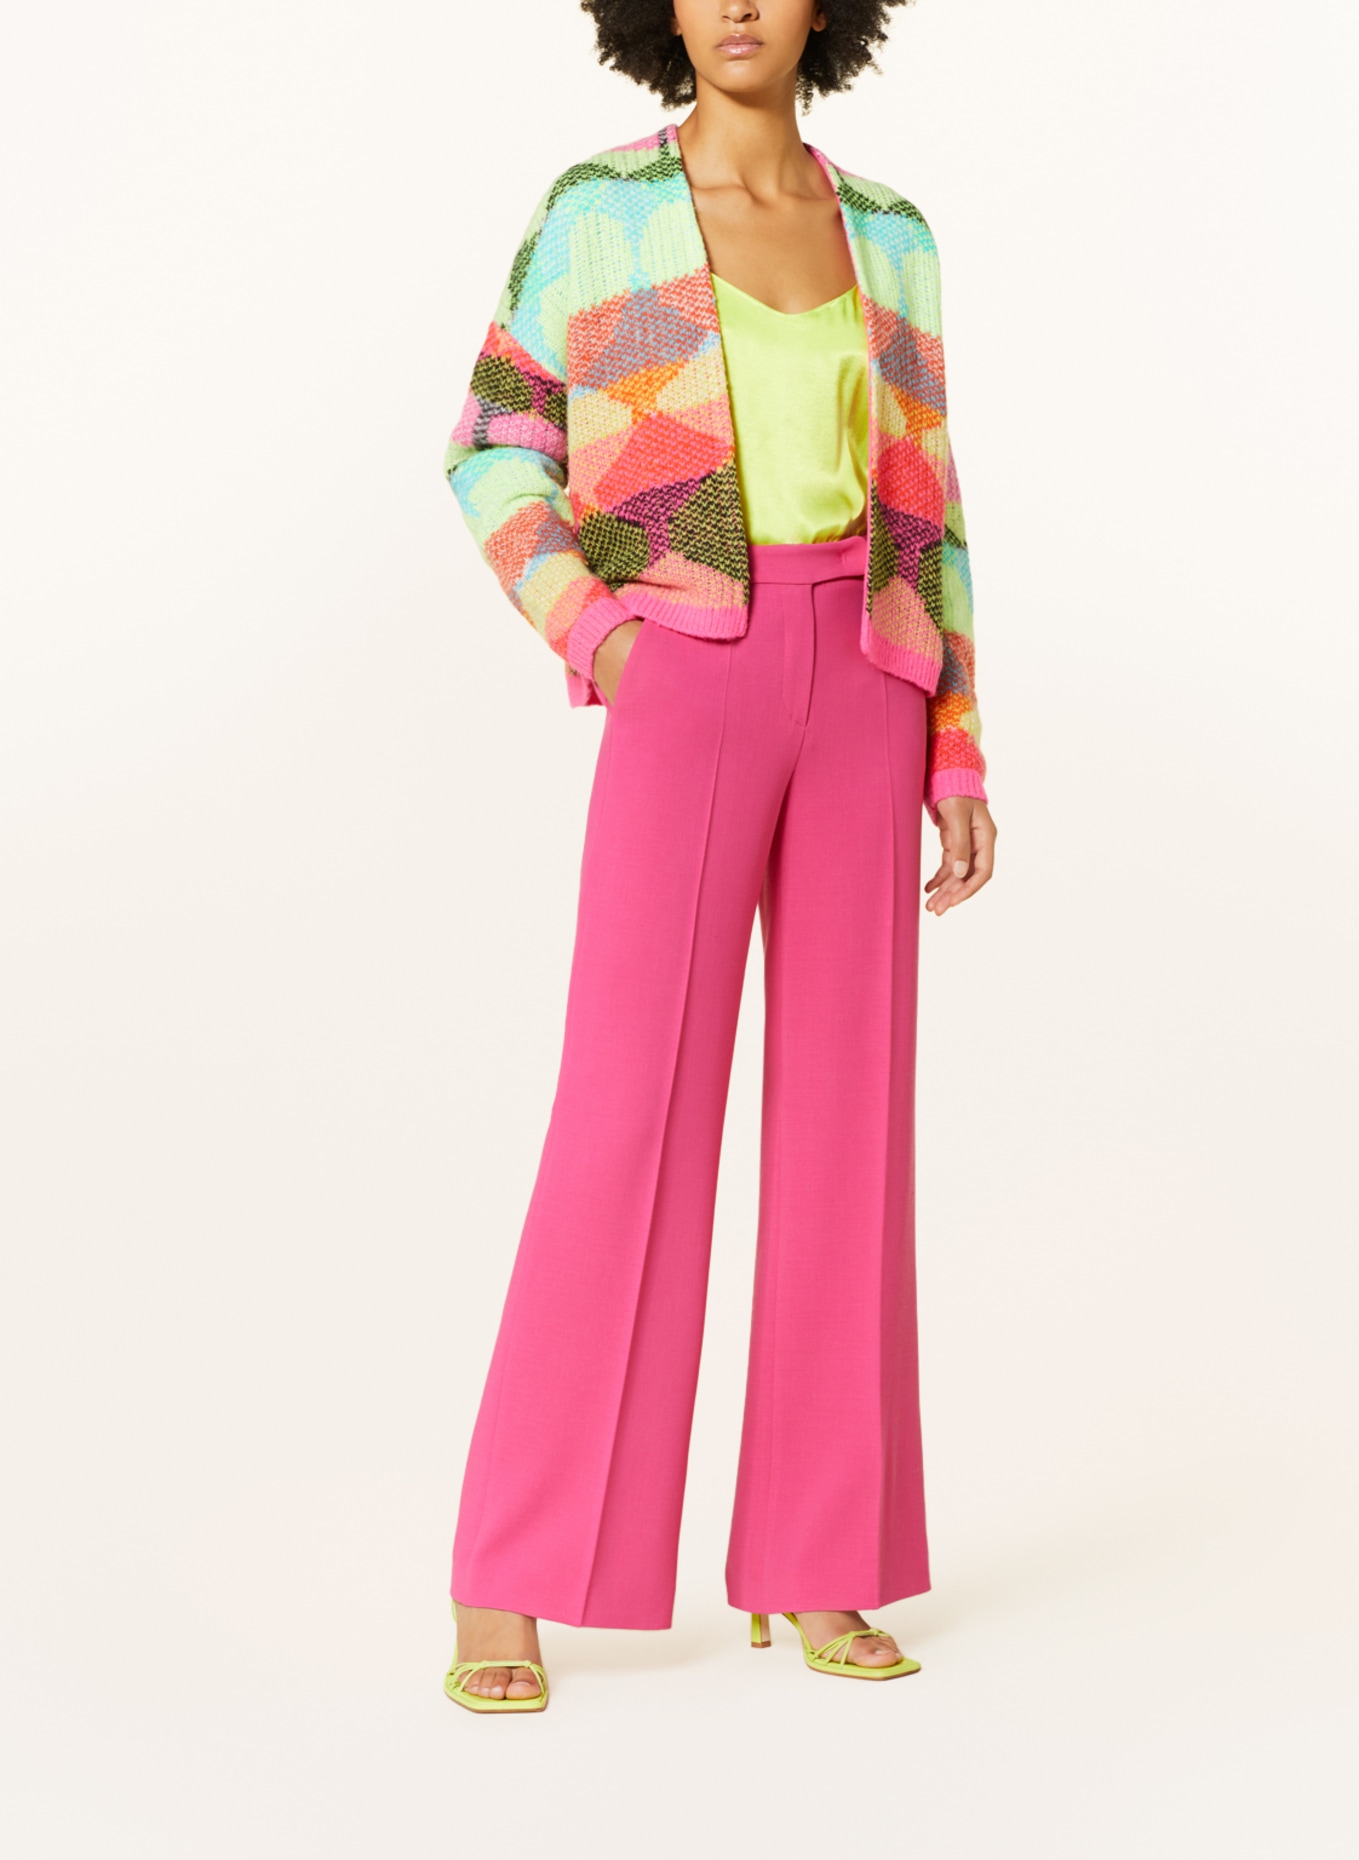 Princess GOES HOLLYWOOD Knit cardigan with merino wool, Color: NEON PINK/ NEON YELLOW/ TURQUOISE (Image 2)